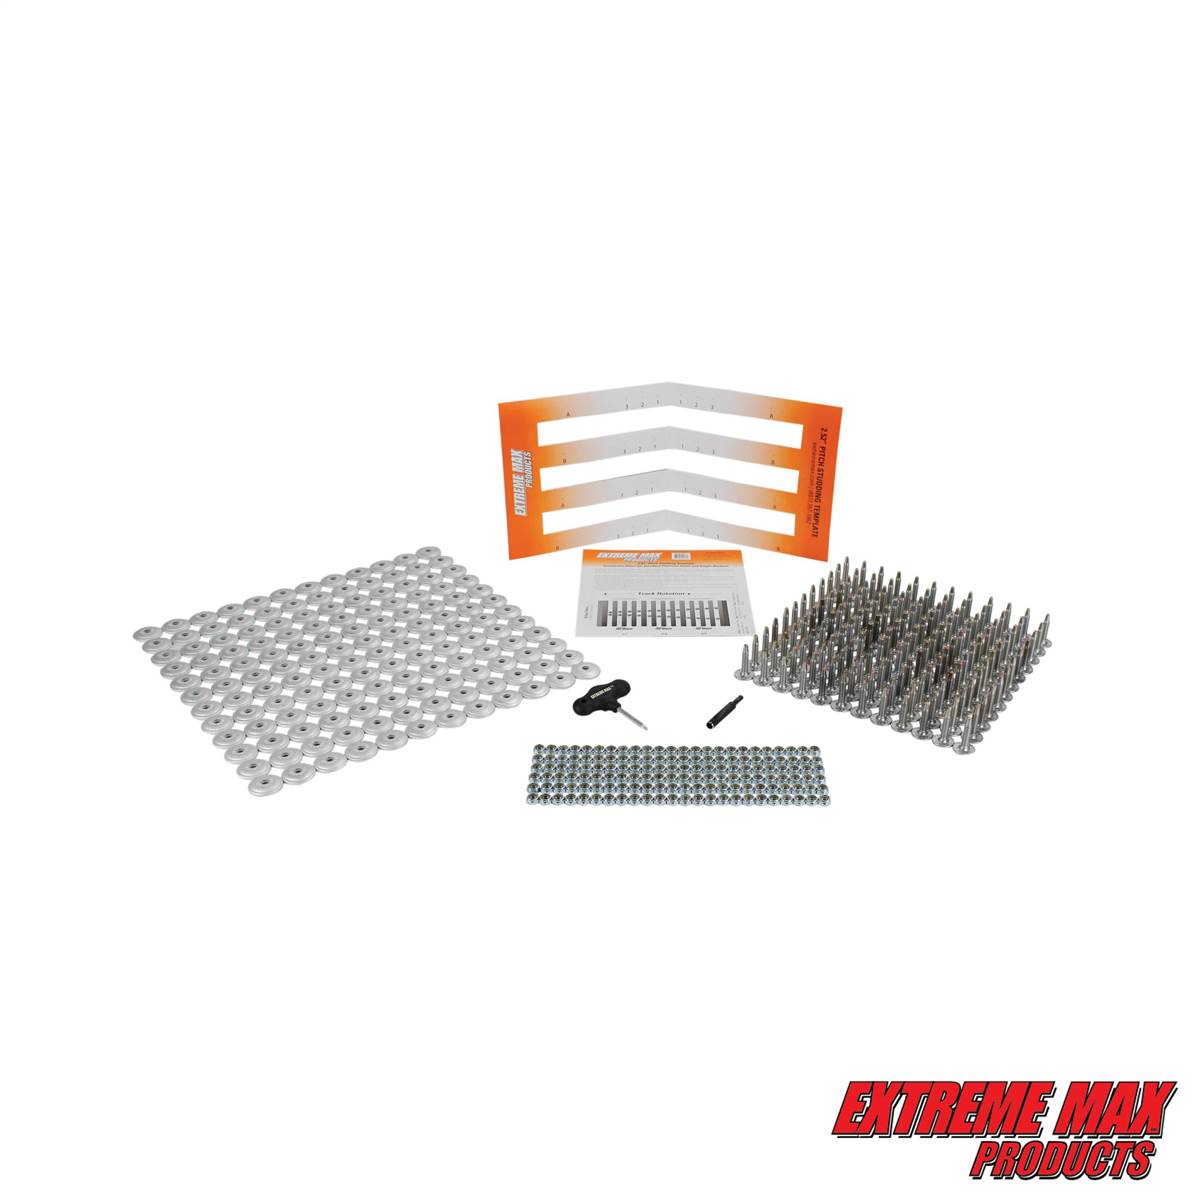 0.875" Stud Length Extreme Max 5001.5460 96-Stud Track Pack with Round Backers 